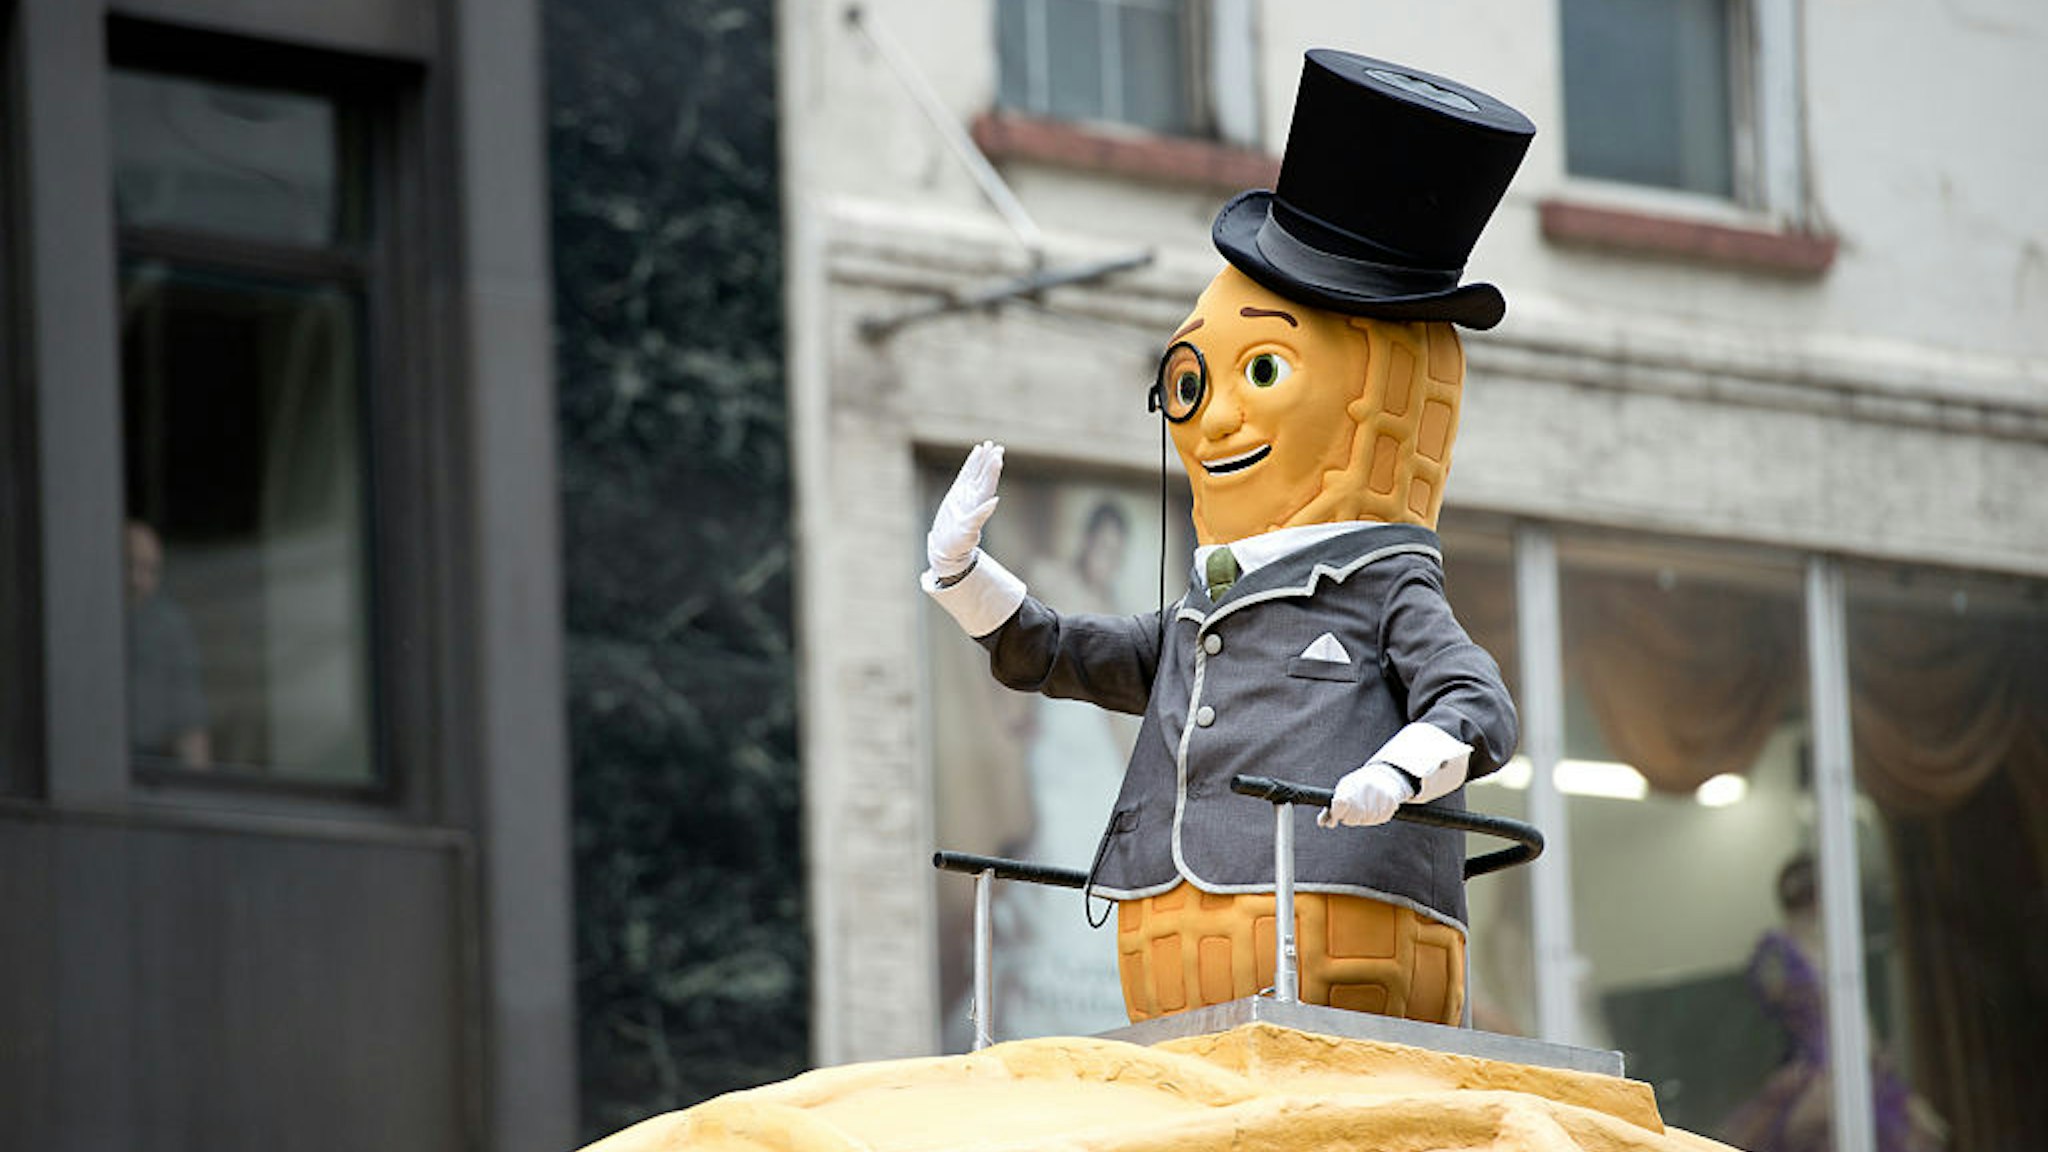 Mr. Peanut attends the 88th Annual Macys Thanksgiving Day Parade at on November 27, 2014 in New York, New York. (Photo by Noam Galai/WireImage)